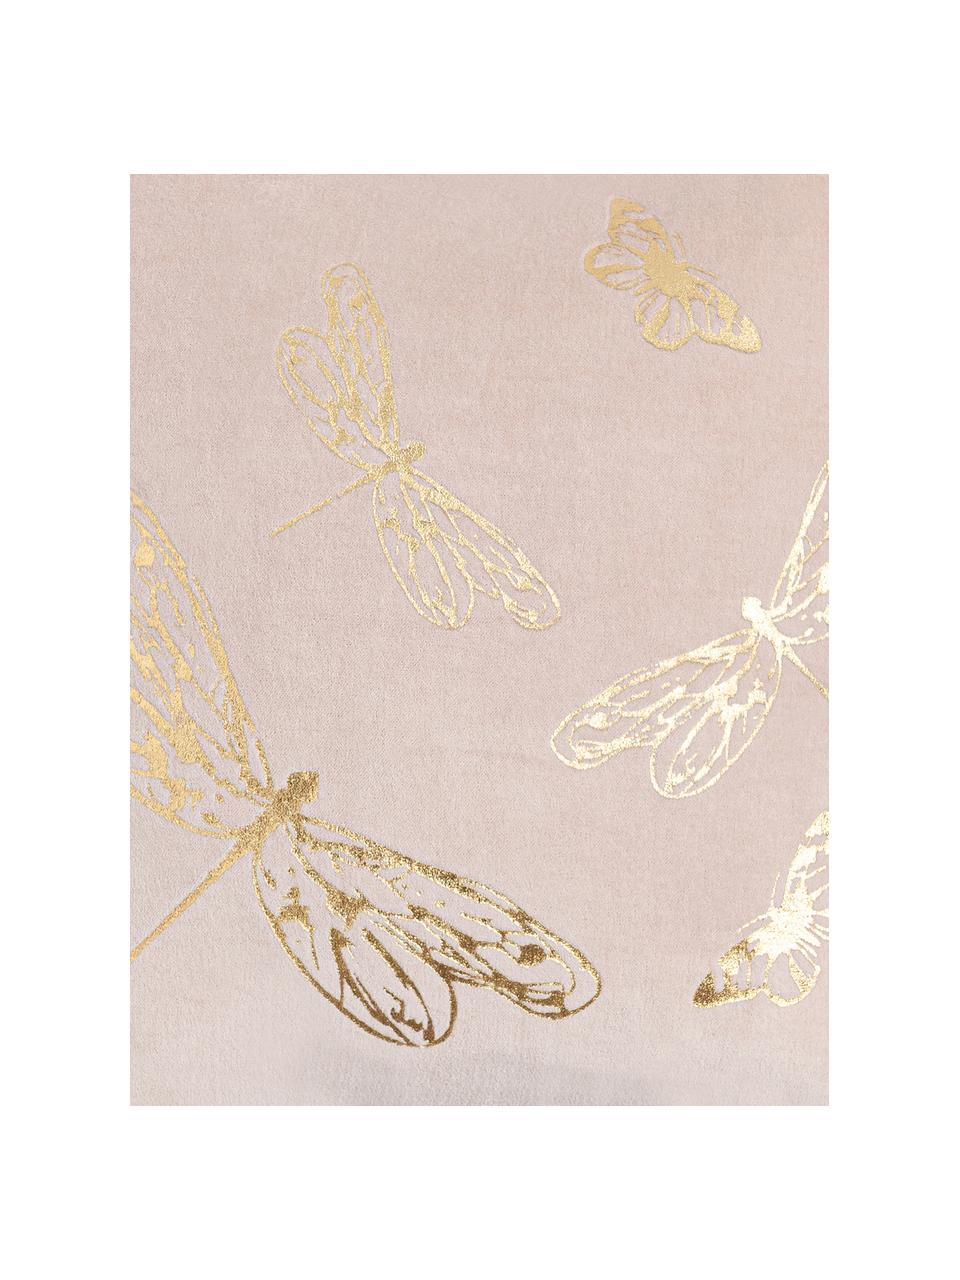 Cuscino in velluto con imbottitura Butterfly, 100% cotone, Rosa, Larg. 45 x Lung. 45 cm